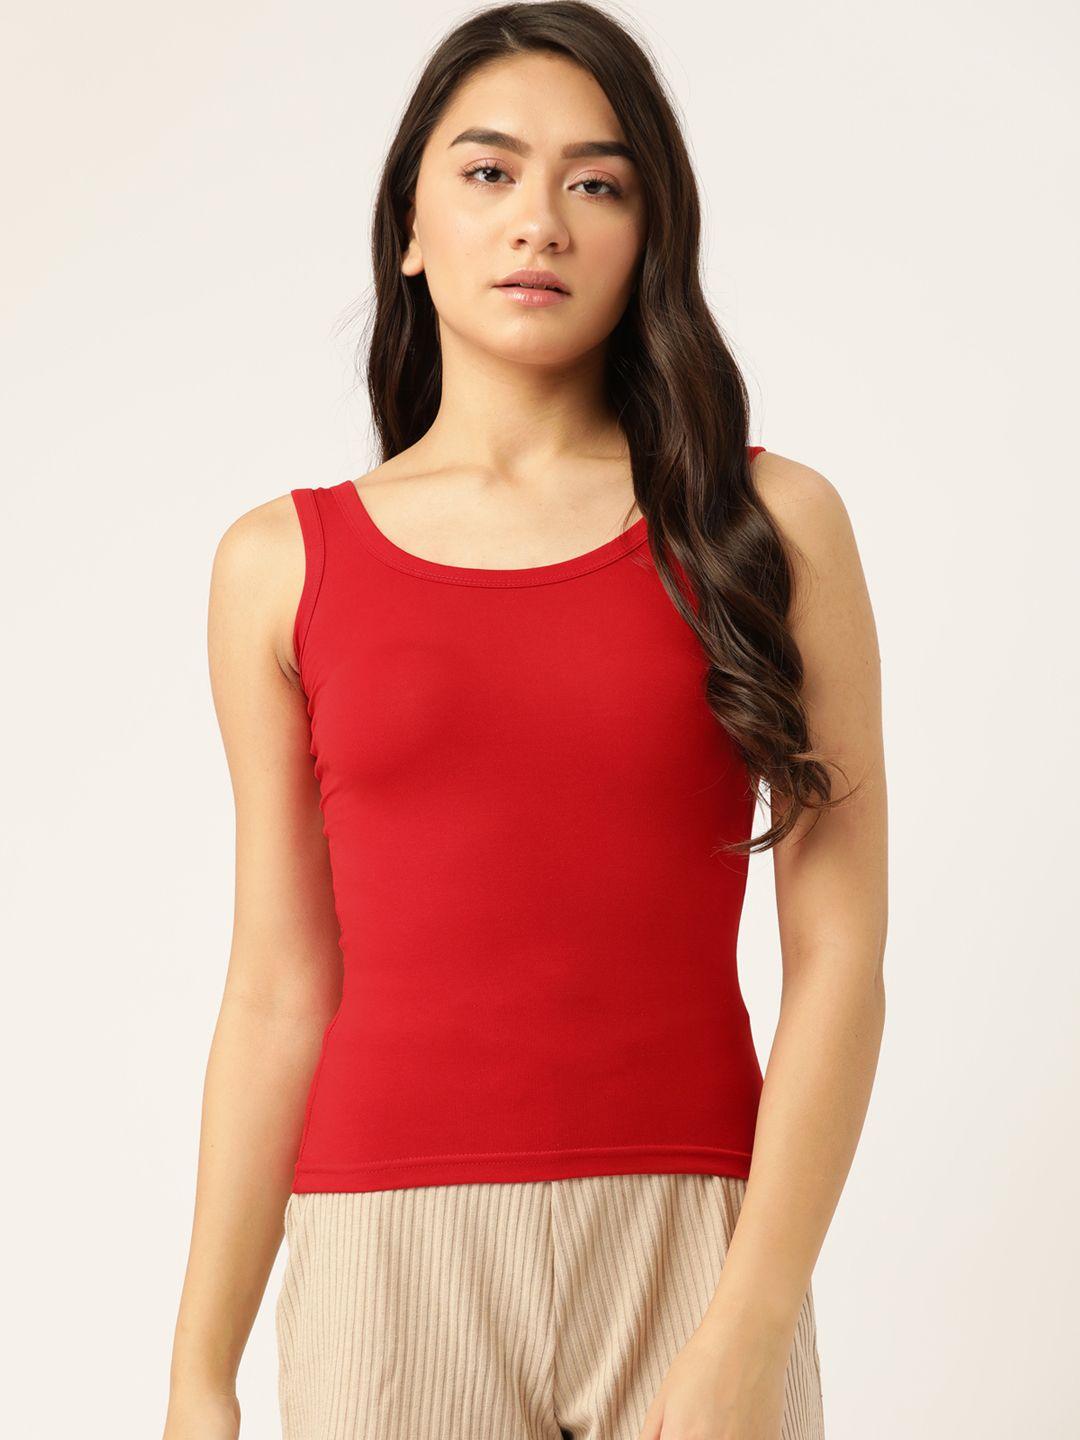 lady-lyka-women-red-solid-cotton-camisole